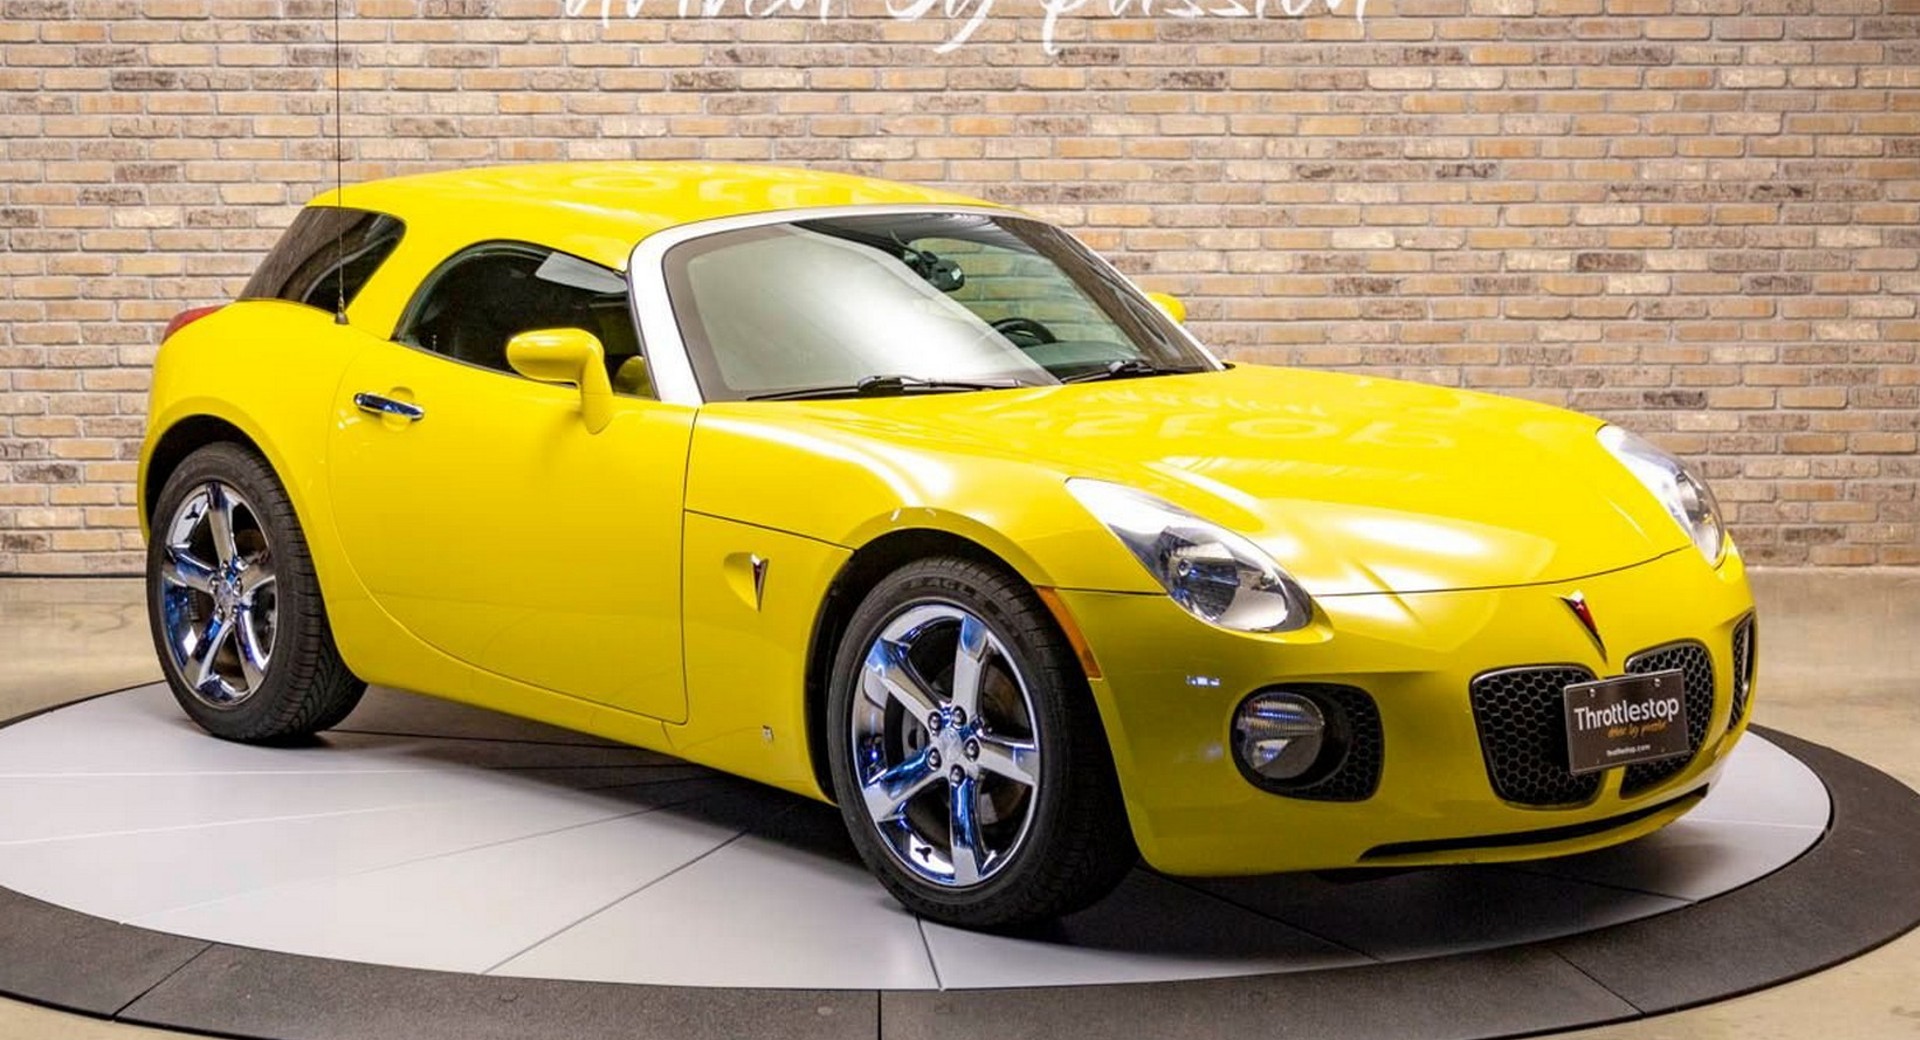 Pontiac Solstice GXP Nomad With Rare Concept Top Might Be A Deal At $22,900  | Carscoops